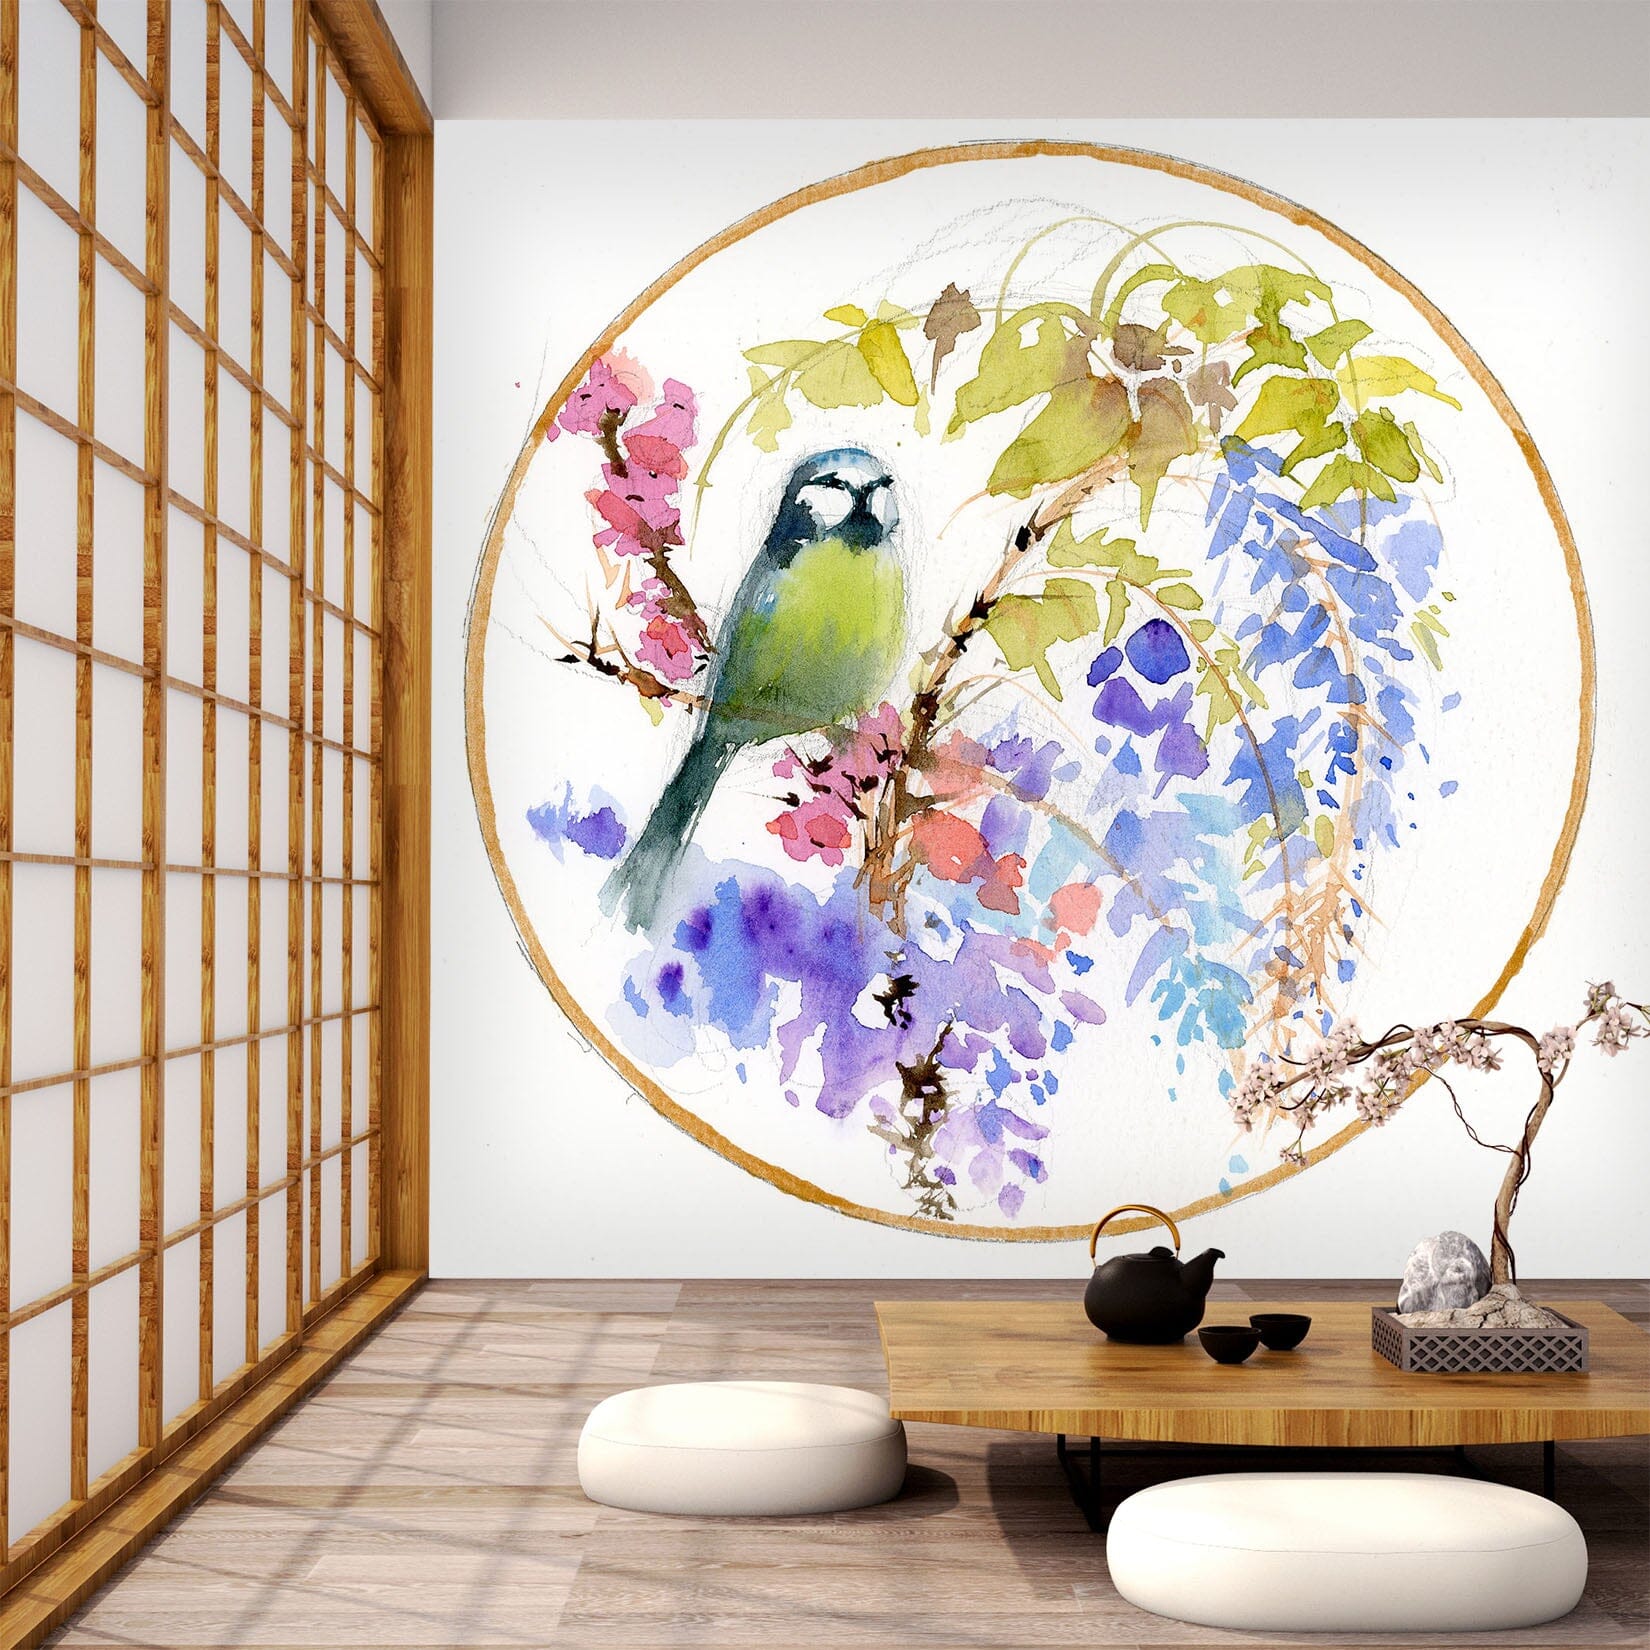 3D Embroidered Bird 1401 Anne Farrall Doyle Wall Mural Wall Murals Wallpaper AJ Wallpaper 2 